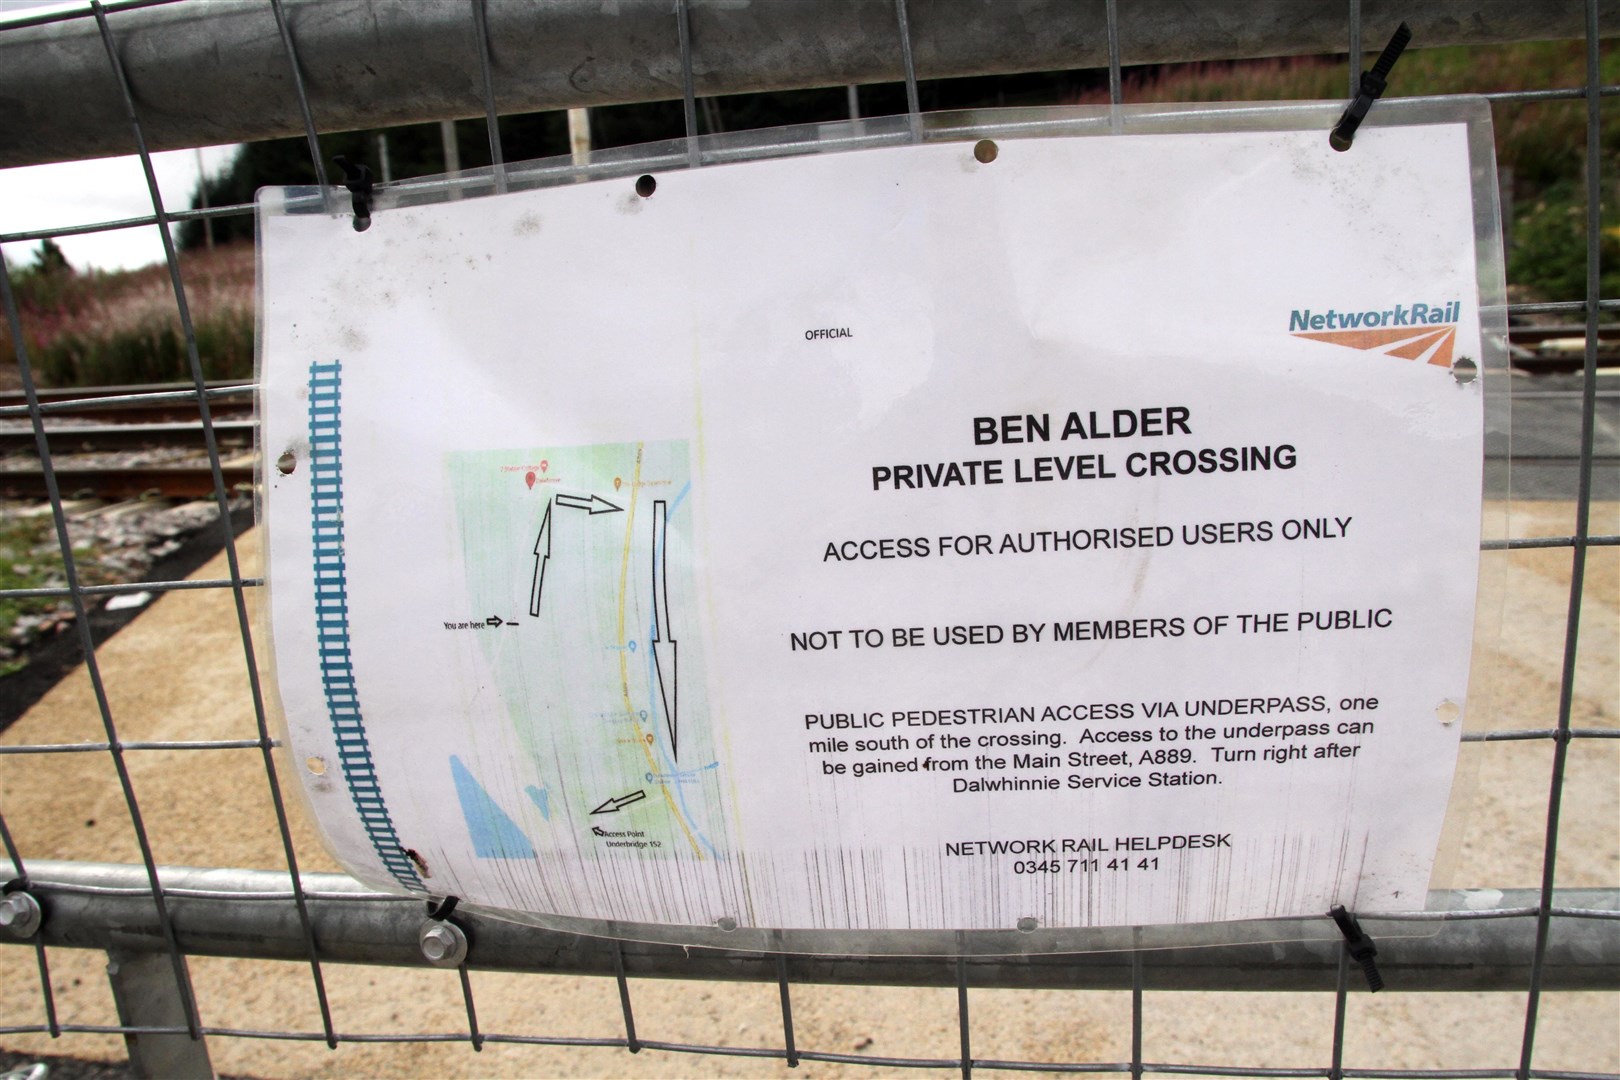 Where was the consultation with the local community? This sign appeared on the locked gates without any prior discussions with users of the popular Ben Alder crossing. The quality of the original signage also came in for criticism.